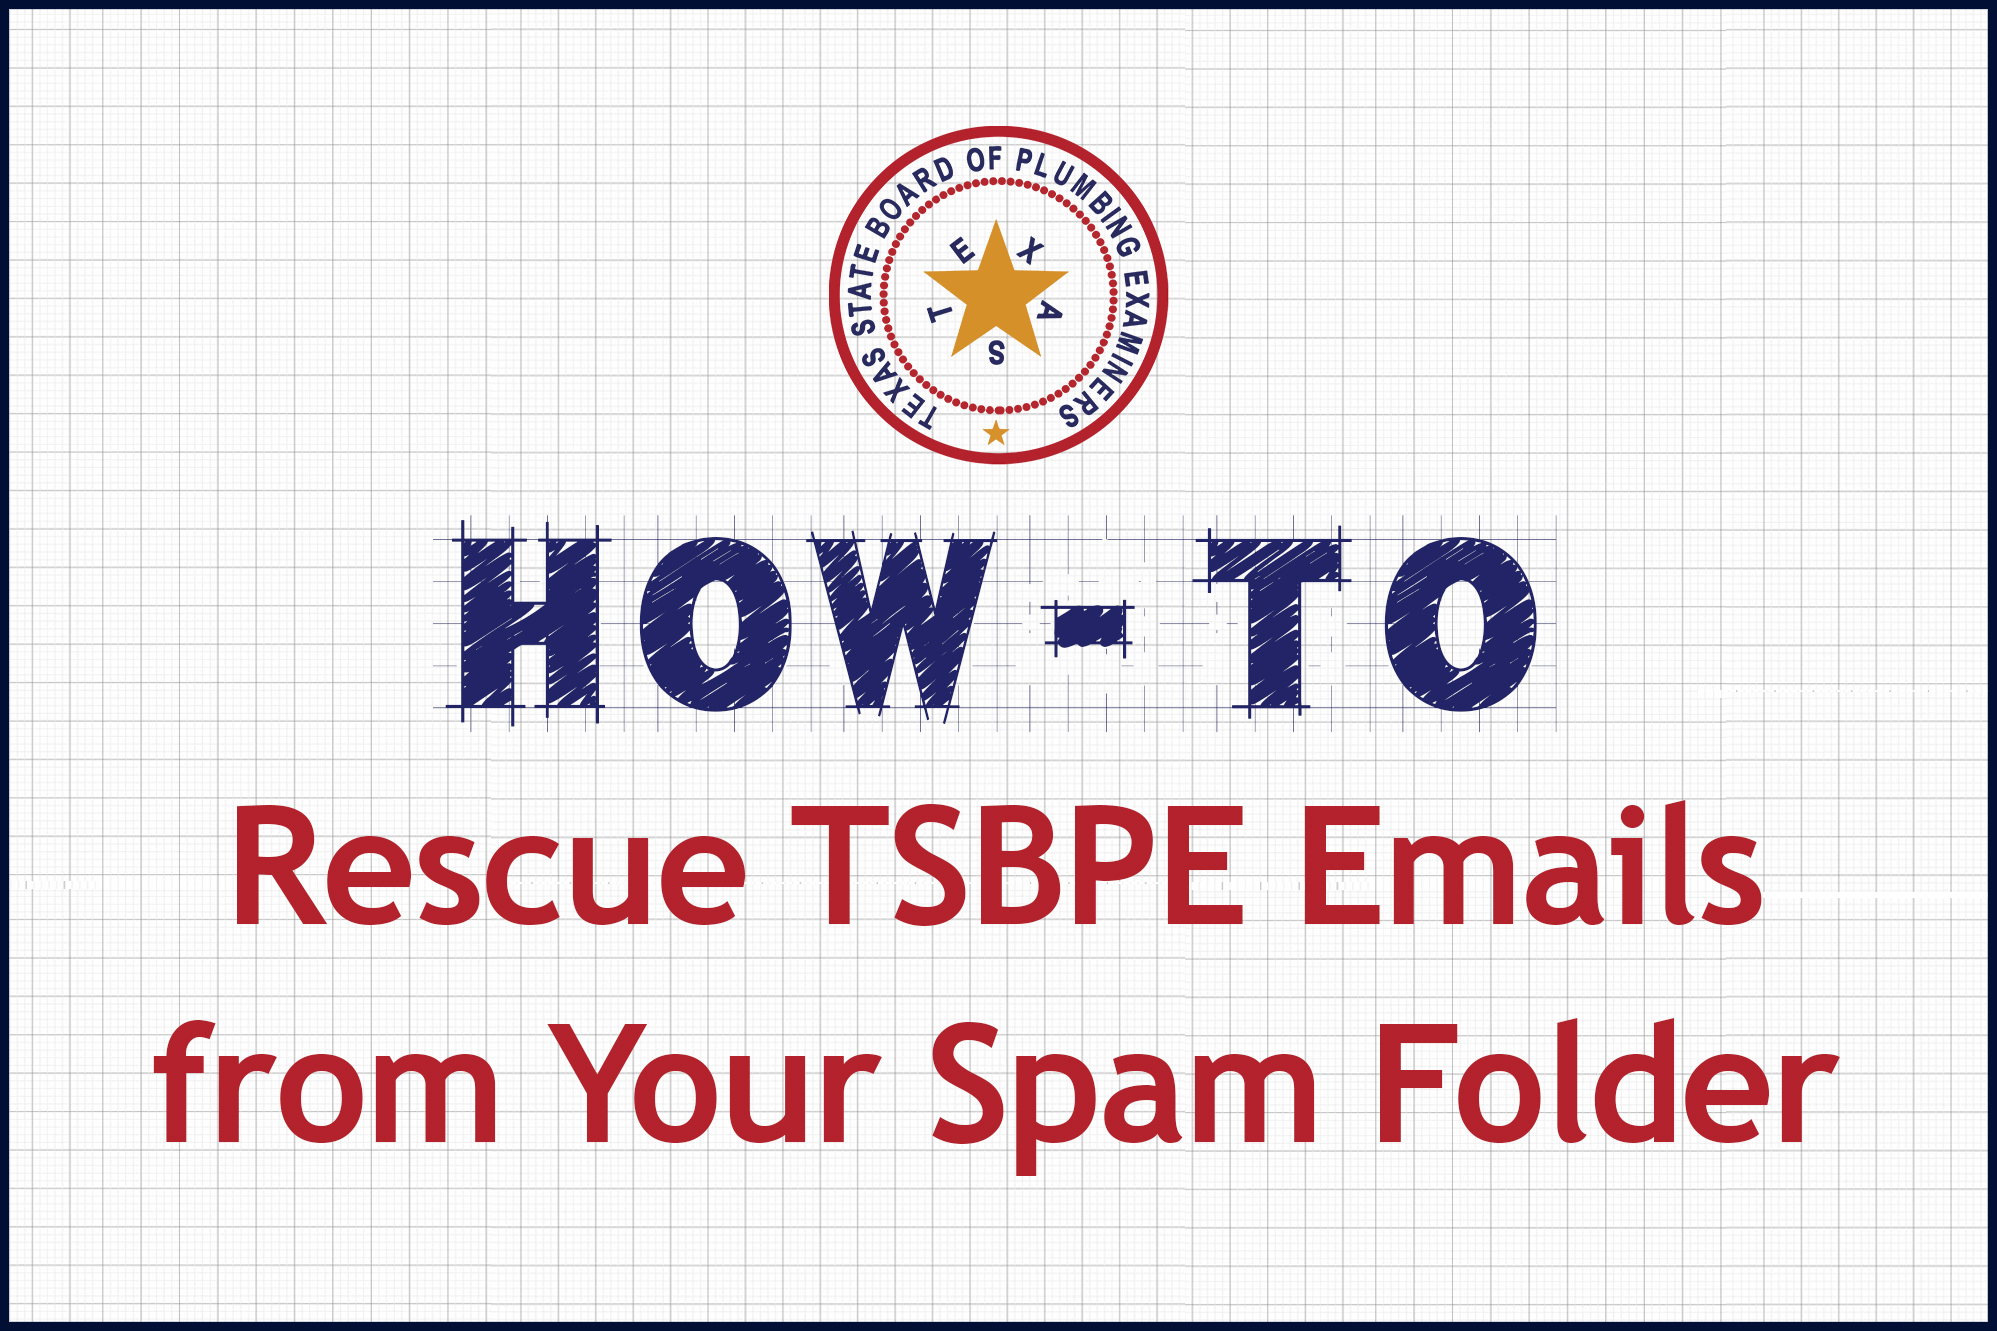 HOW - TO Rescue TSBPE Emails from Your Spam Folder